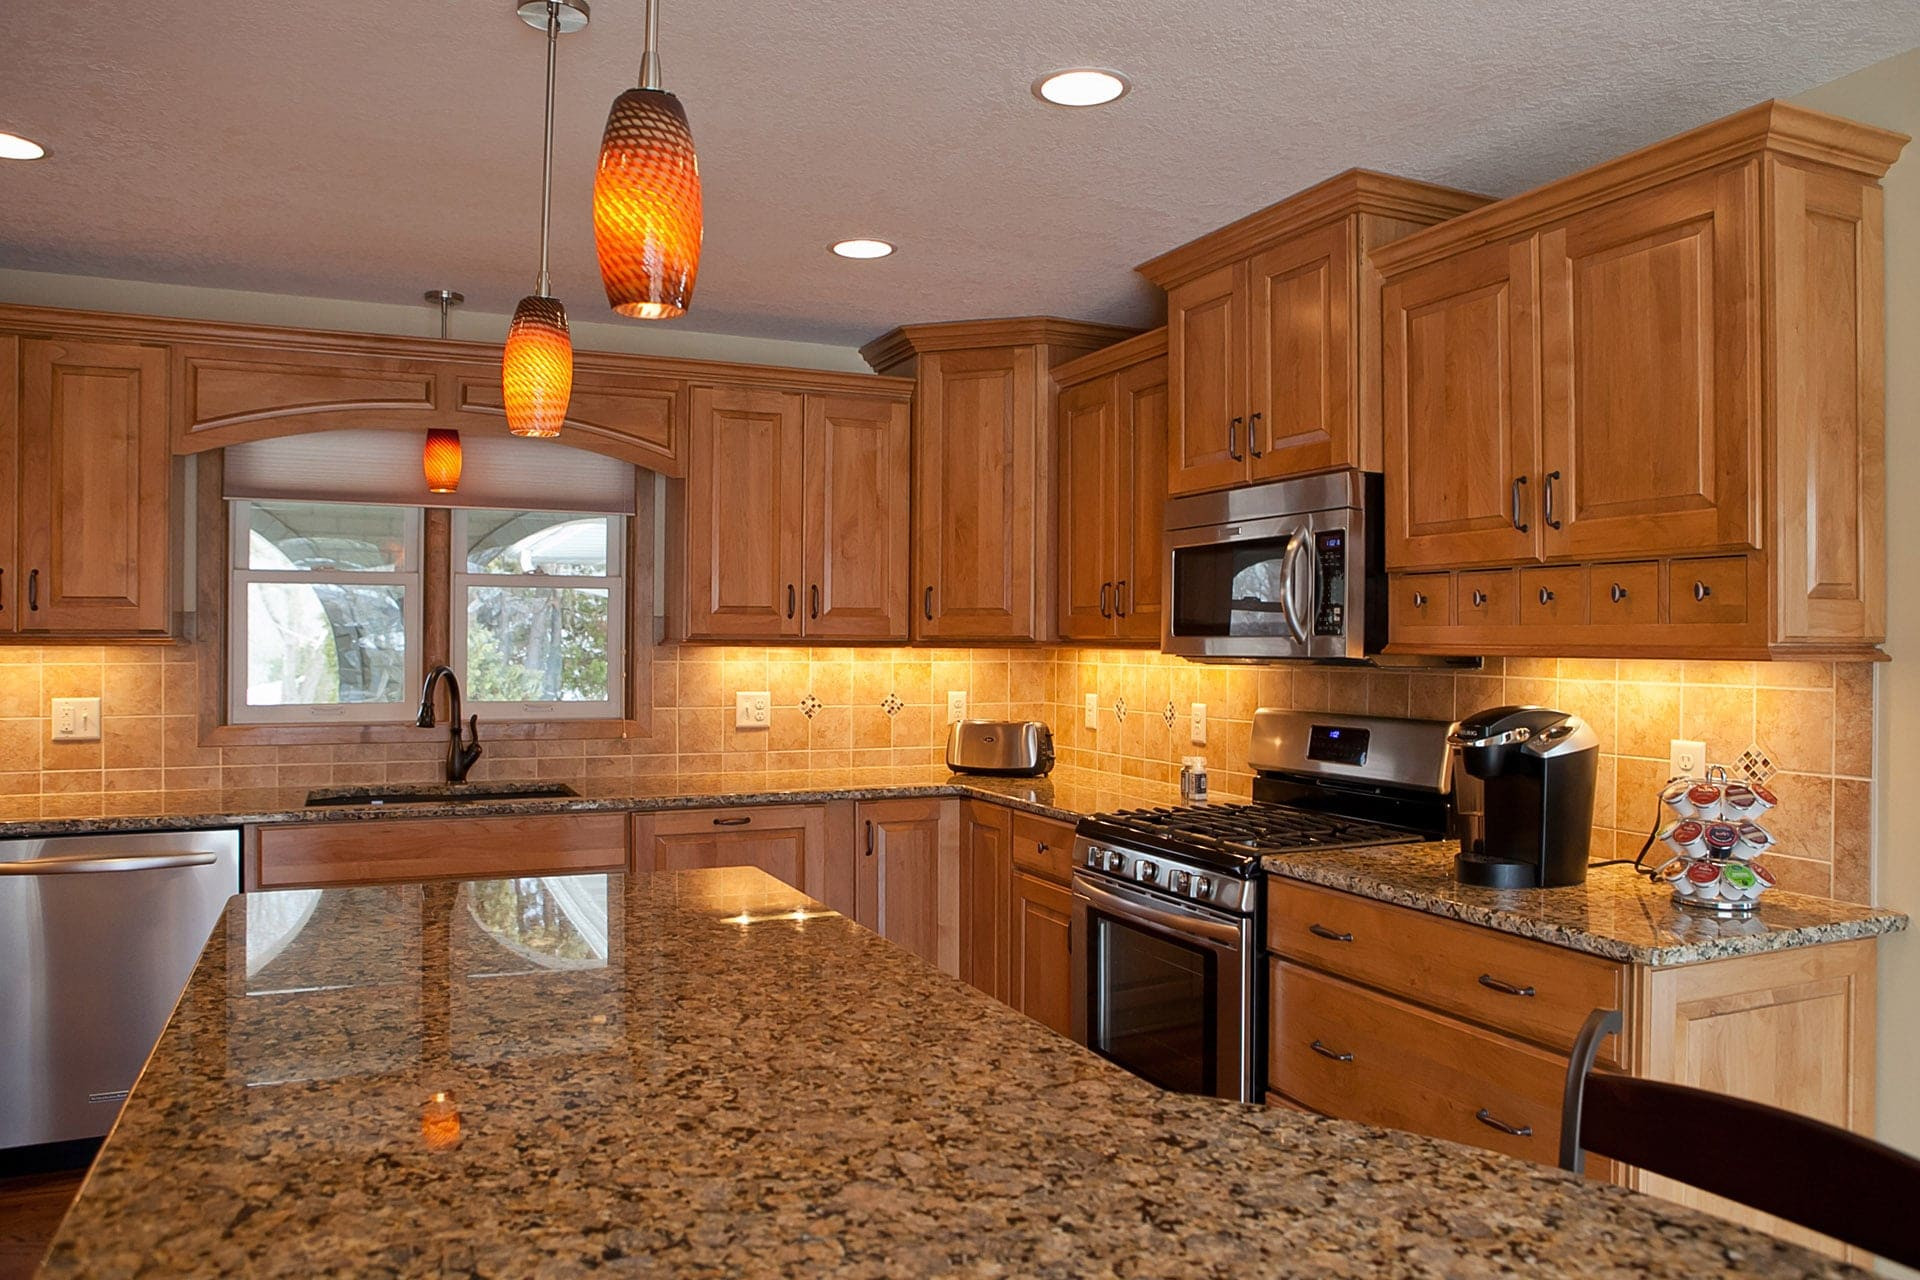 Kitchen Remodeling Layout
 Countertops & Remodeling